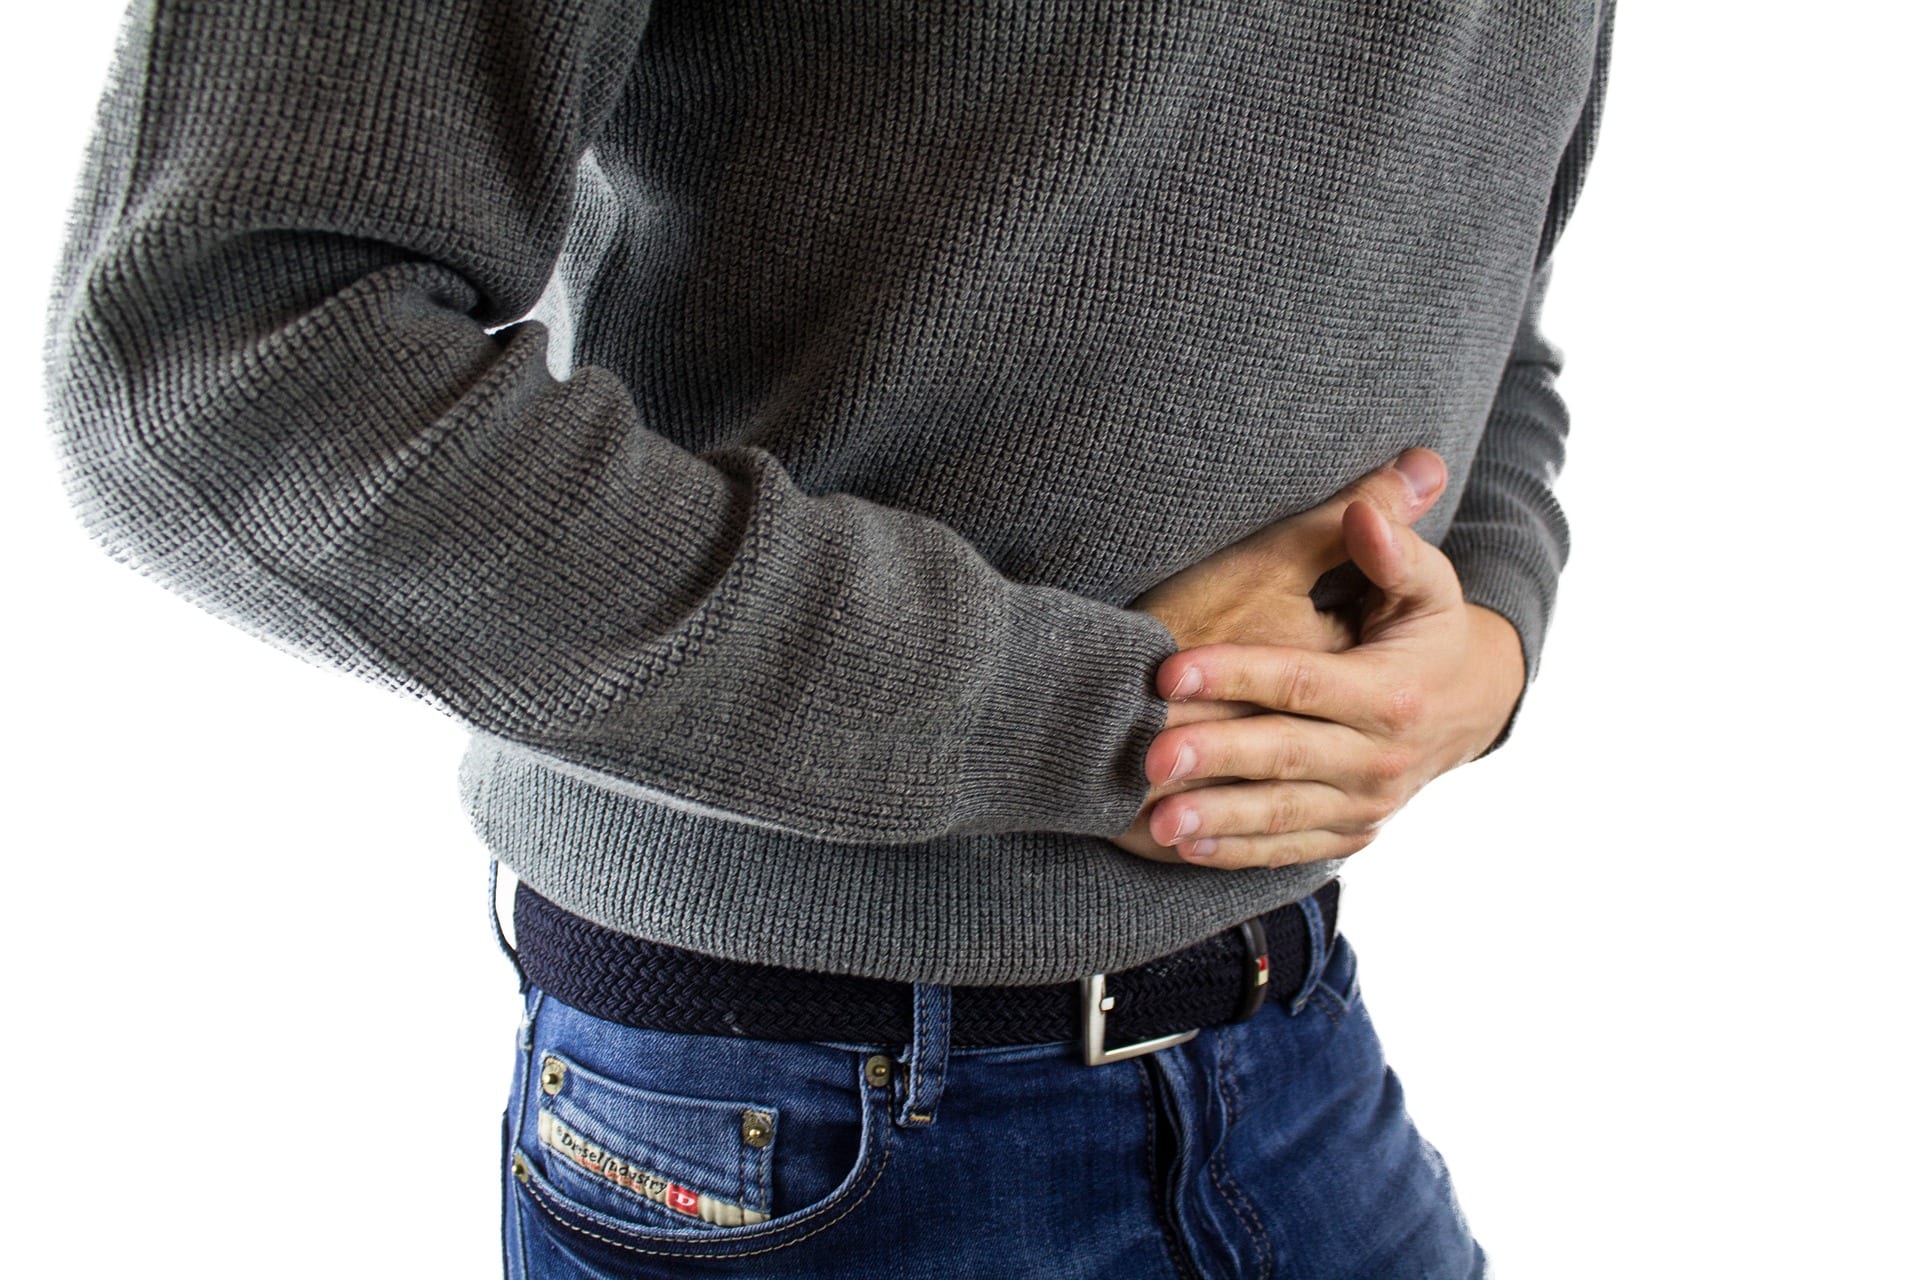 Man in blue jeans and grey sweater holding abdomen in pain; image by derneuemann, via Pixabay.com.